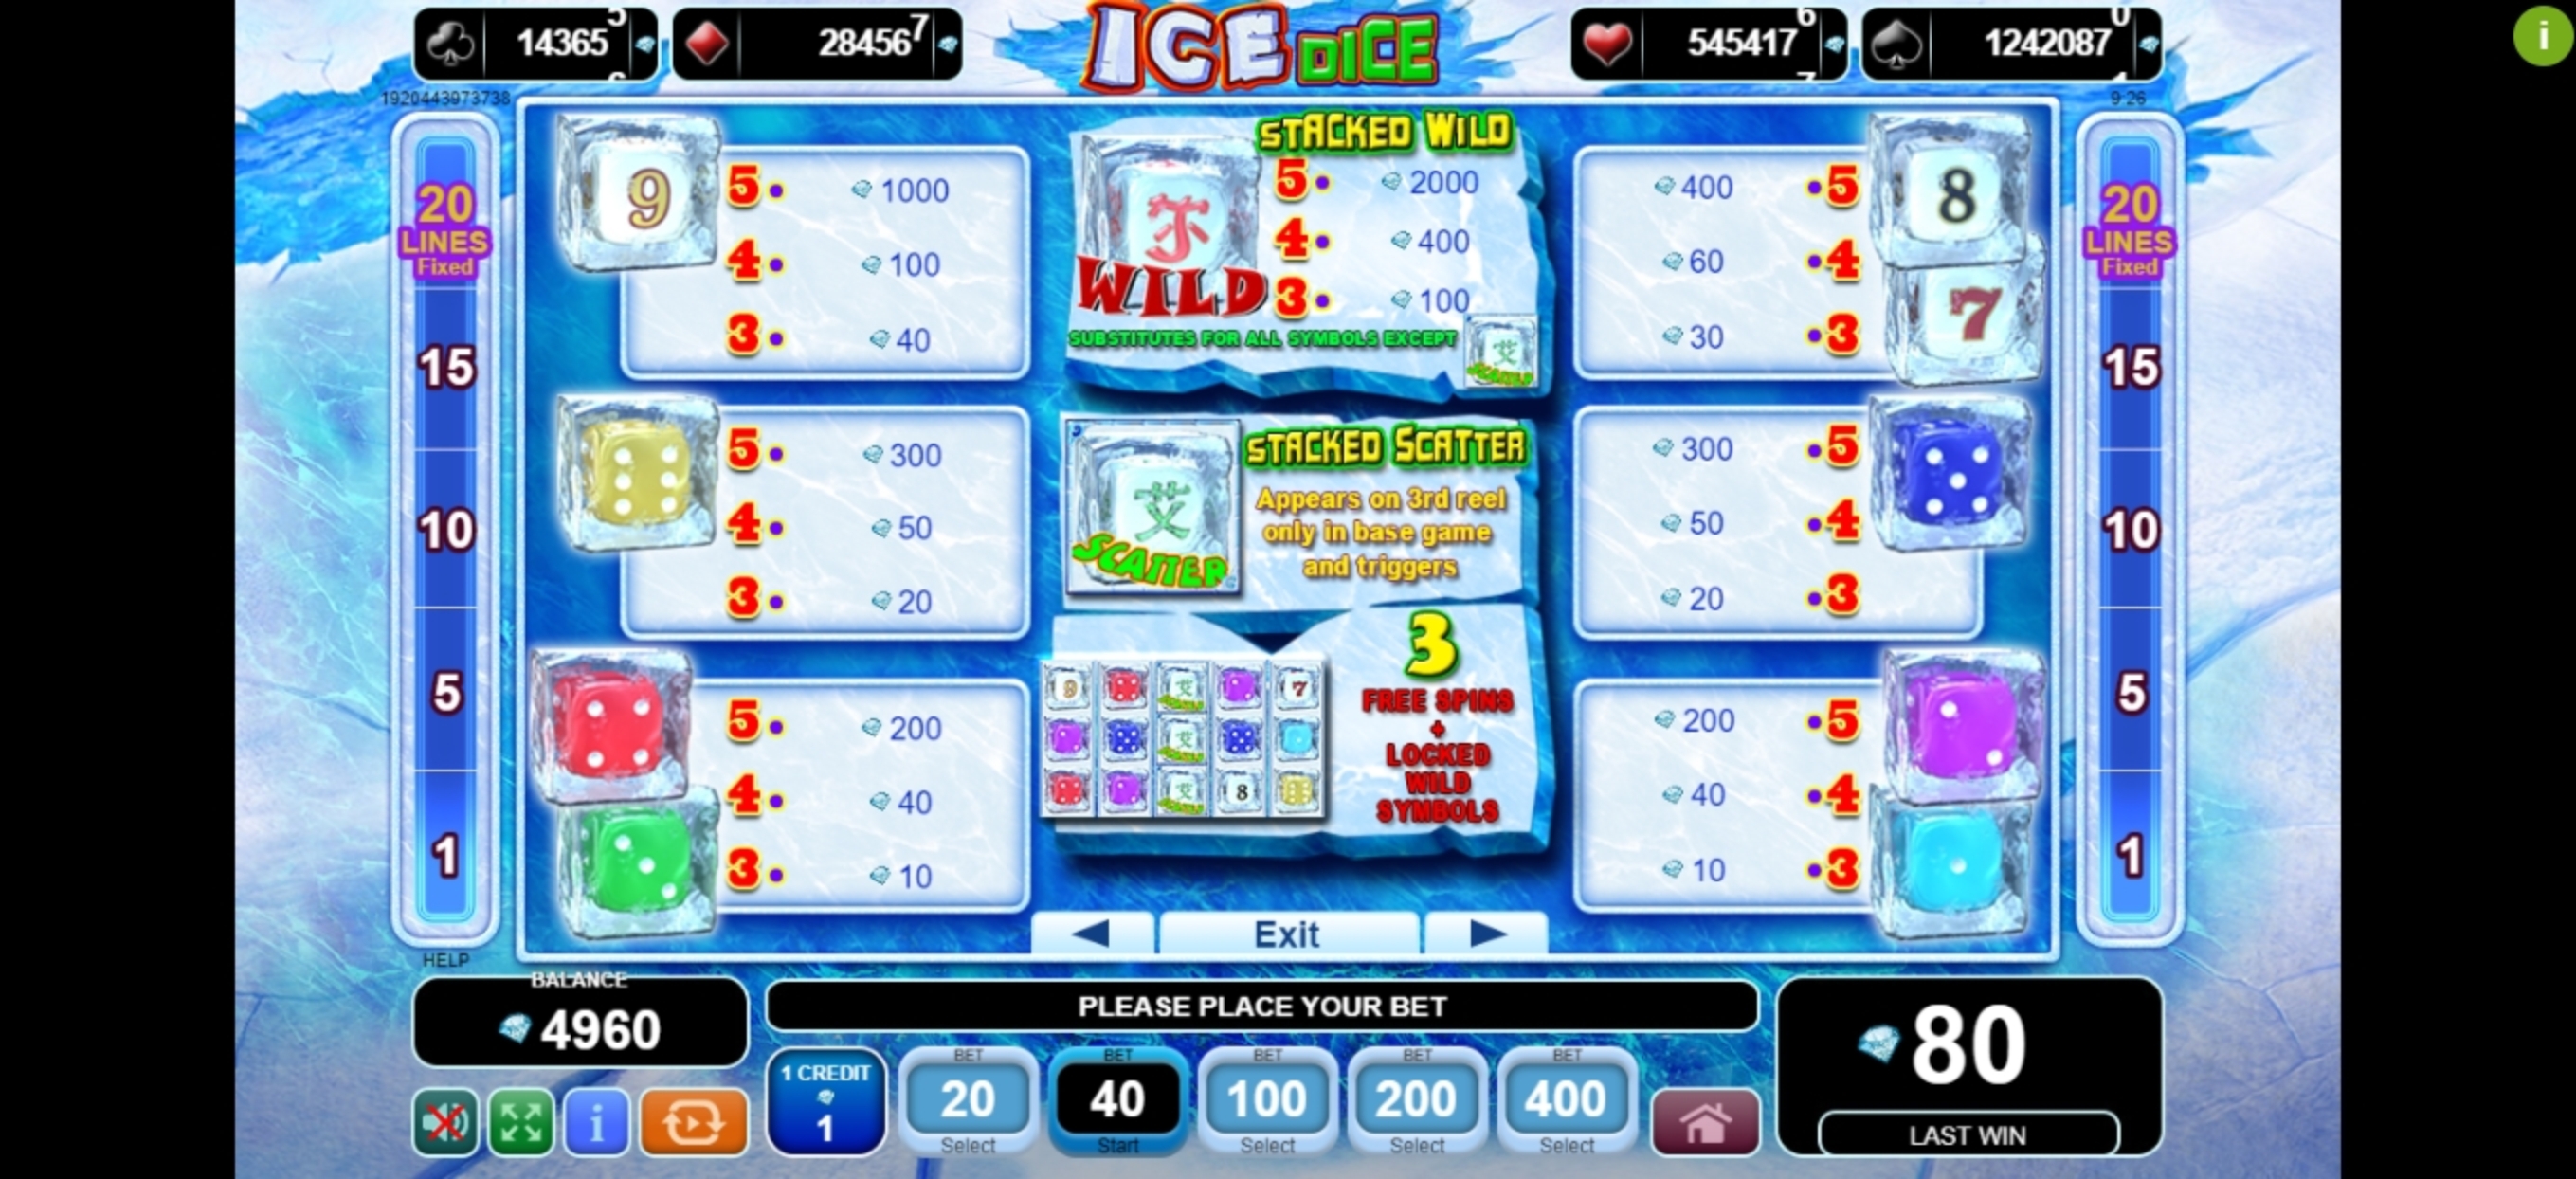 Info of Ice Dice Slot Game by EGT